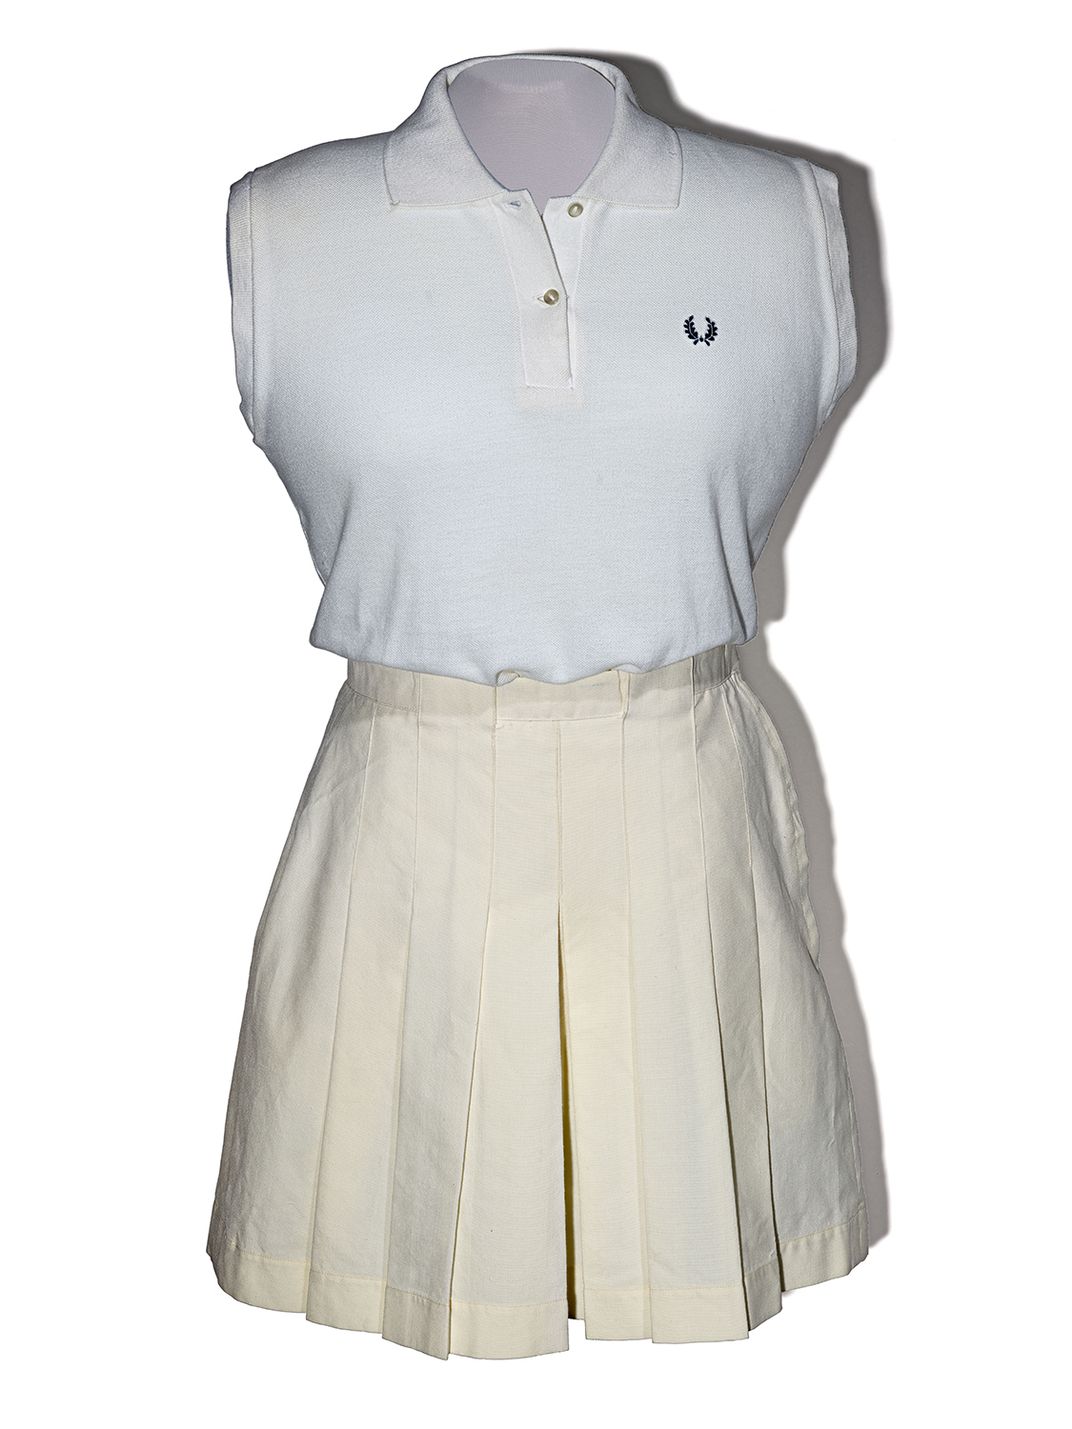 Tennis outfit worn by Althea Gibson